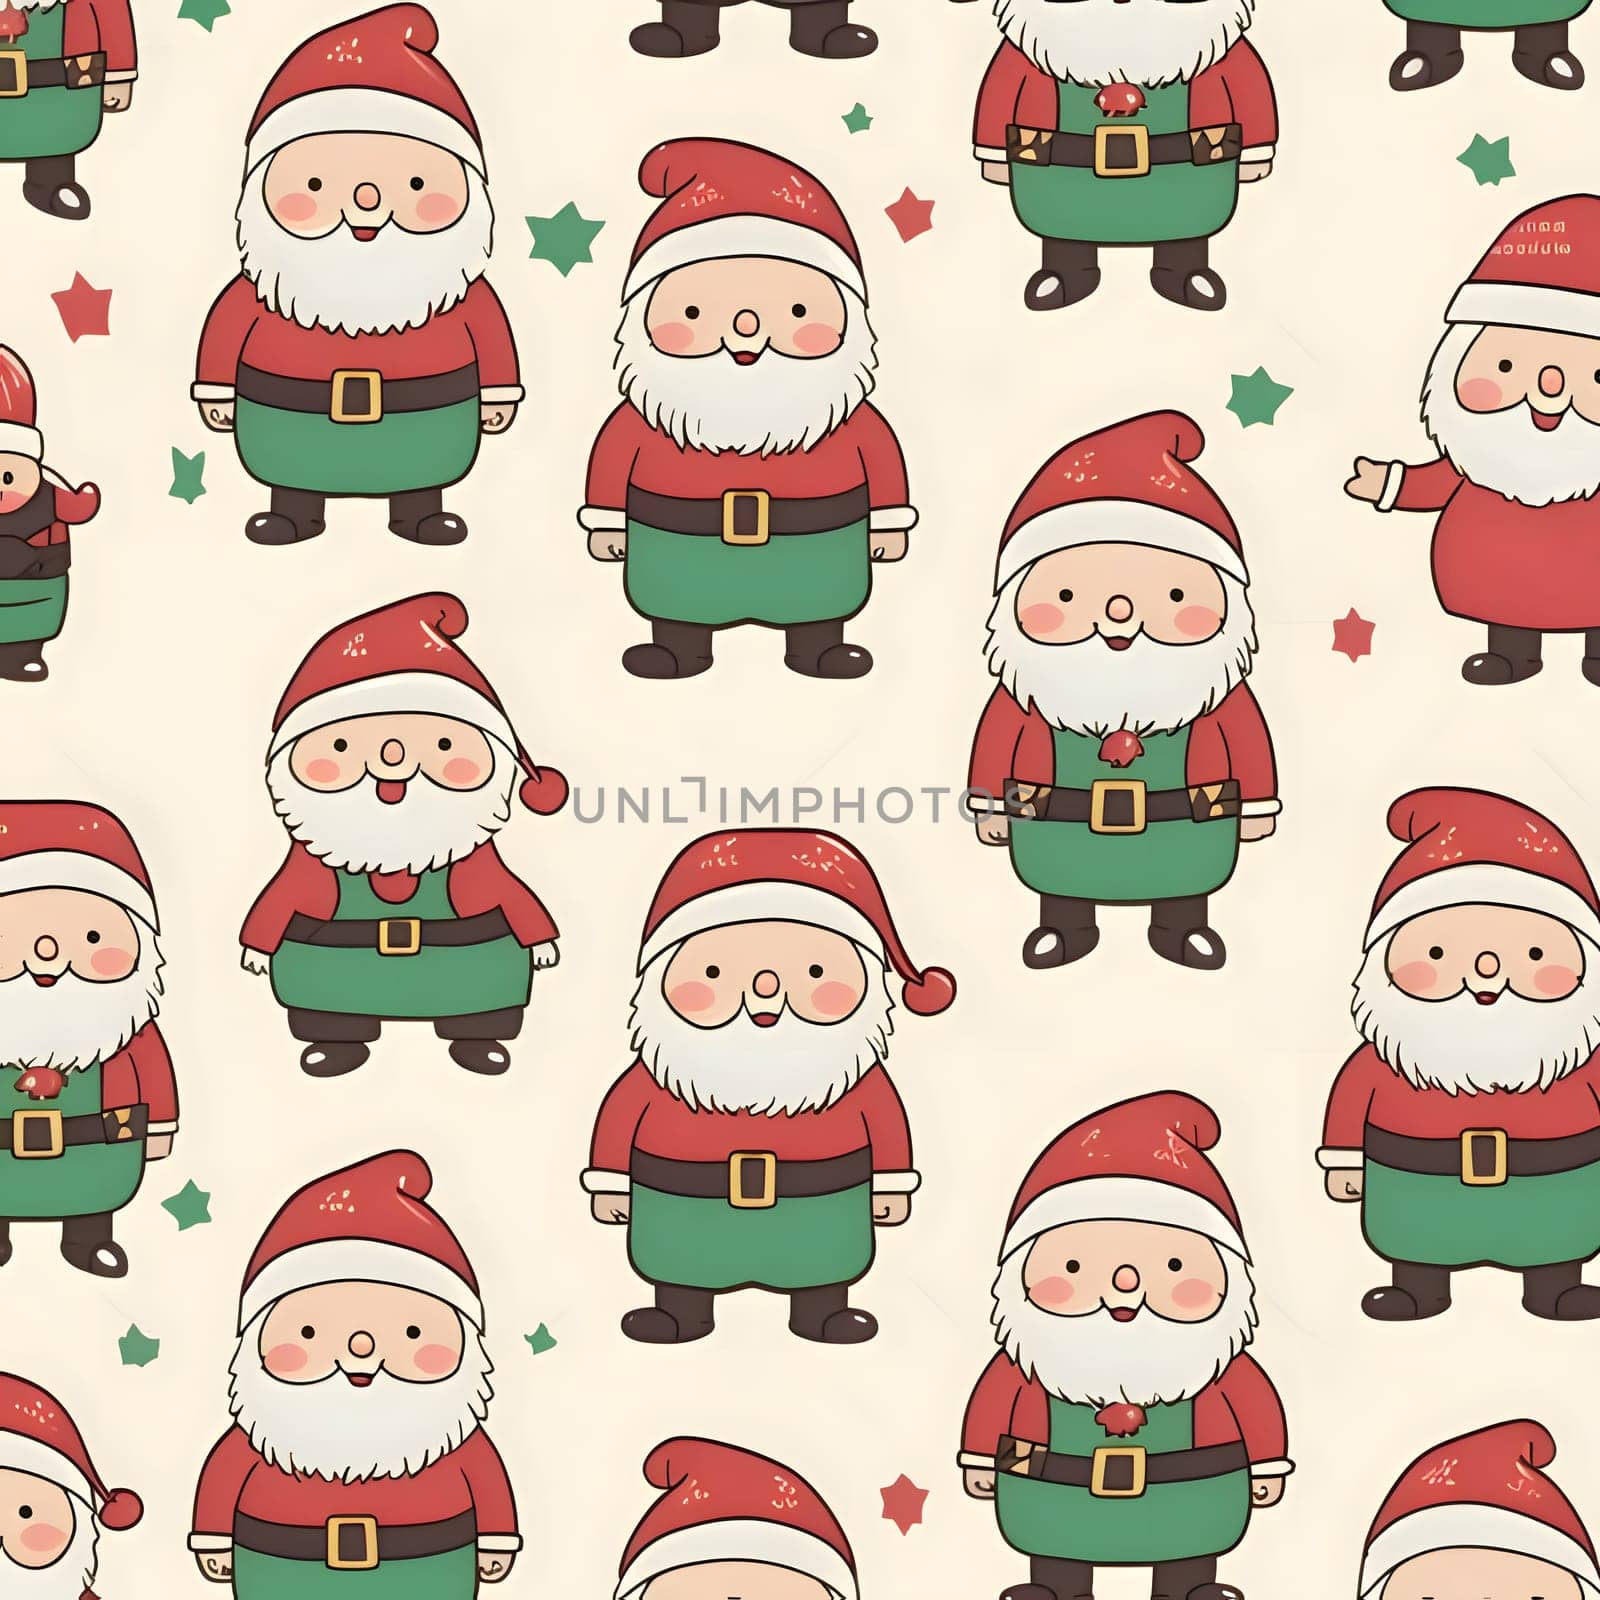 Patterns and banners backgrounds: Seamless pattern with Santa Claus. Christmas background. Vector illustration.